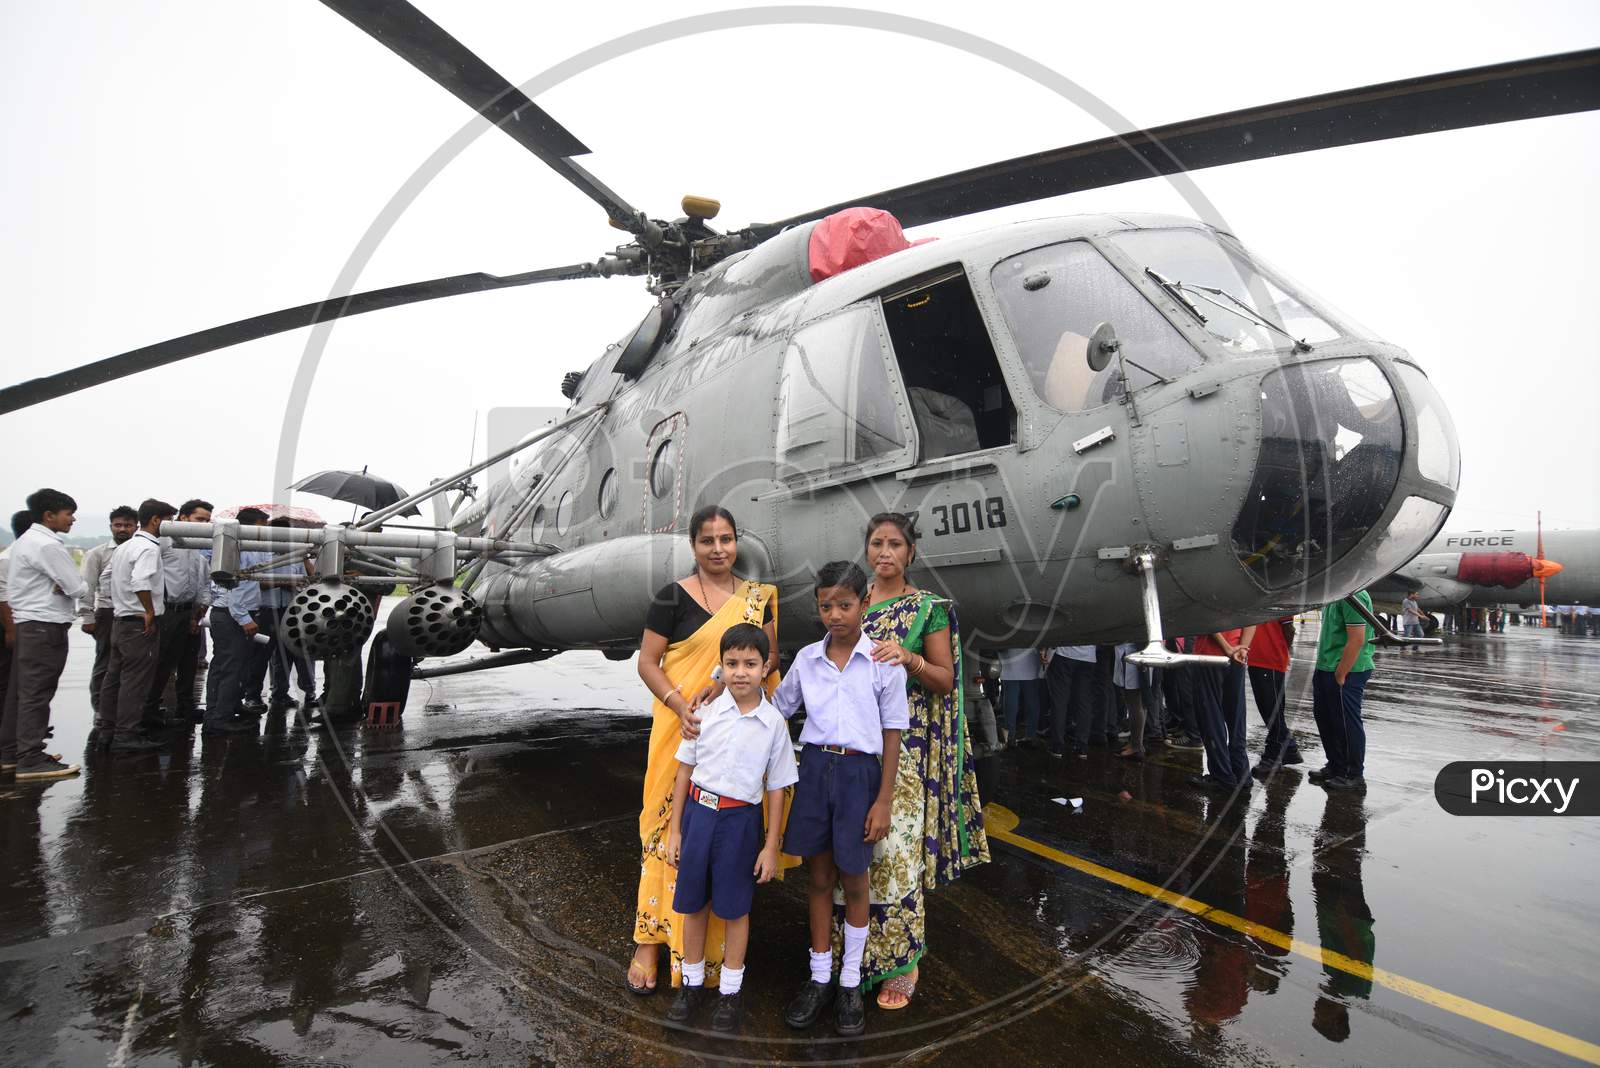 Visitors Watching the Indian Air Force Helicopters During Expo In Guwahati, Assam